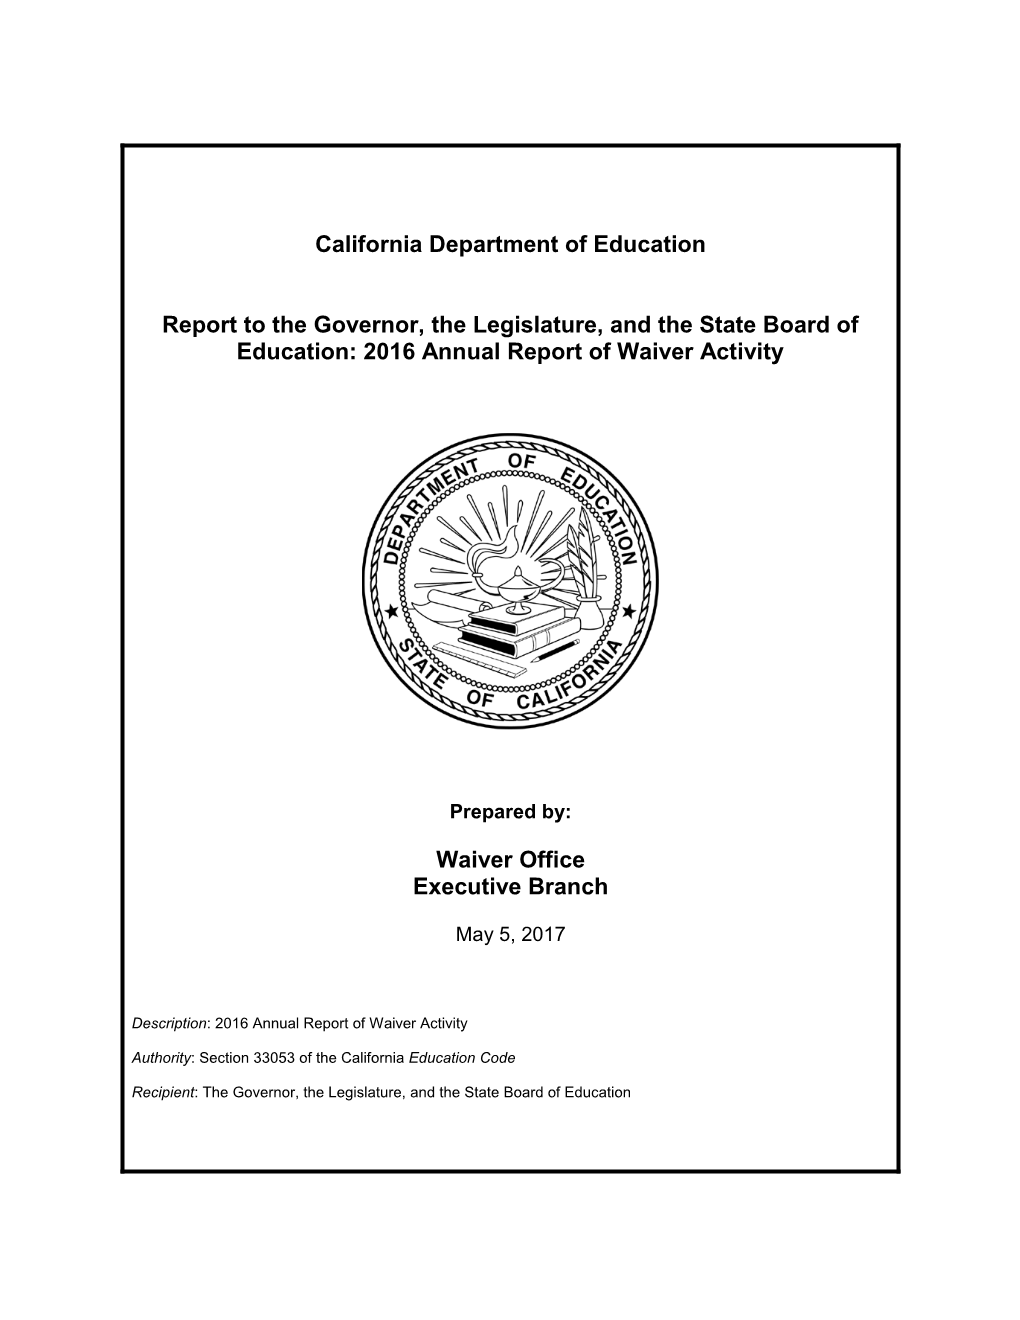 Annual Report of Waiver Activity for 2016 - Waivers (CA Dept of Education)